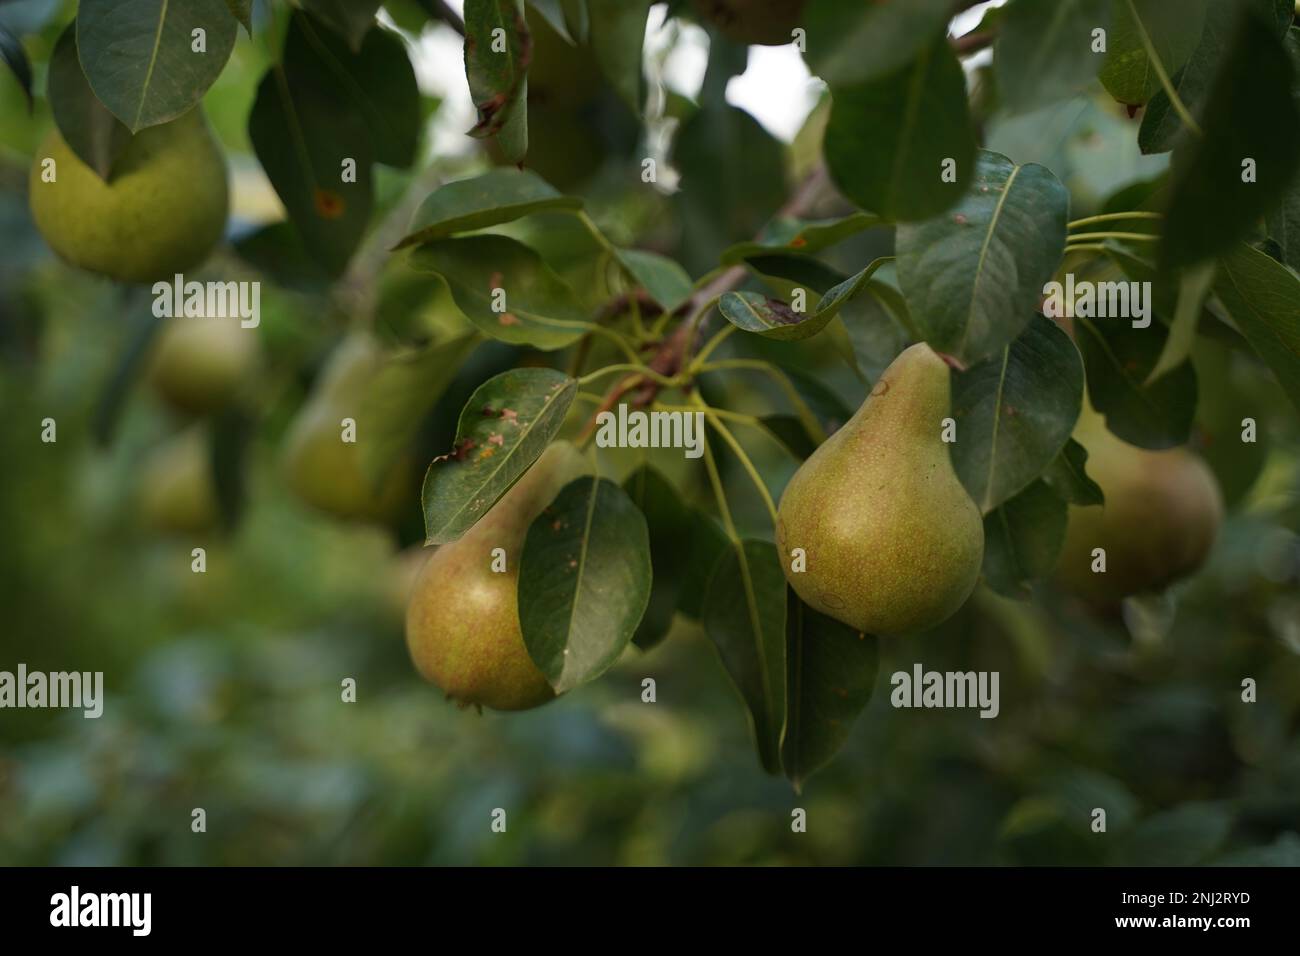 Perfect pear with GMO. Selective focus. Stock Photo